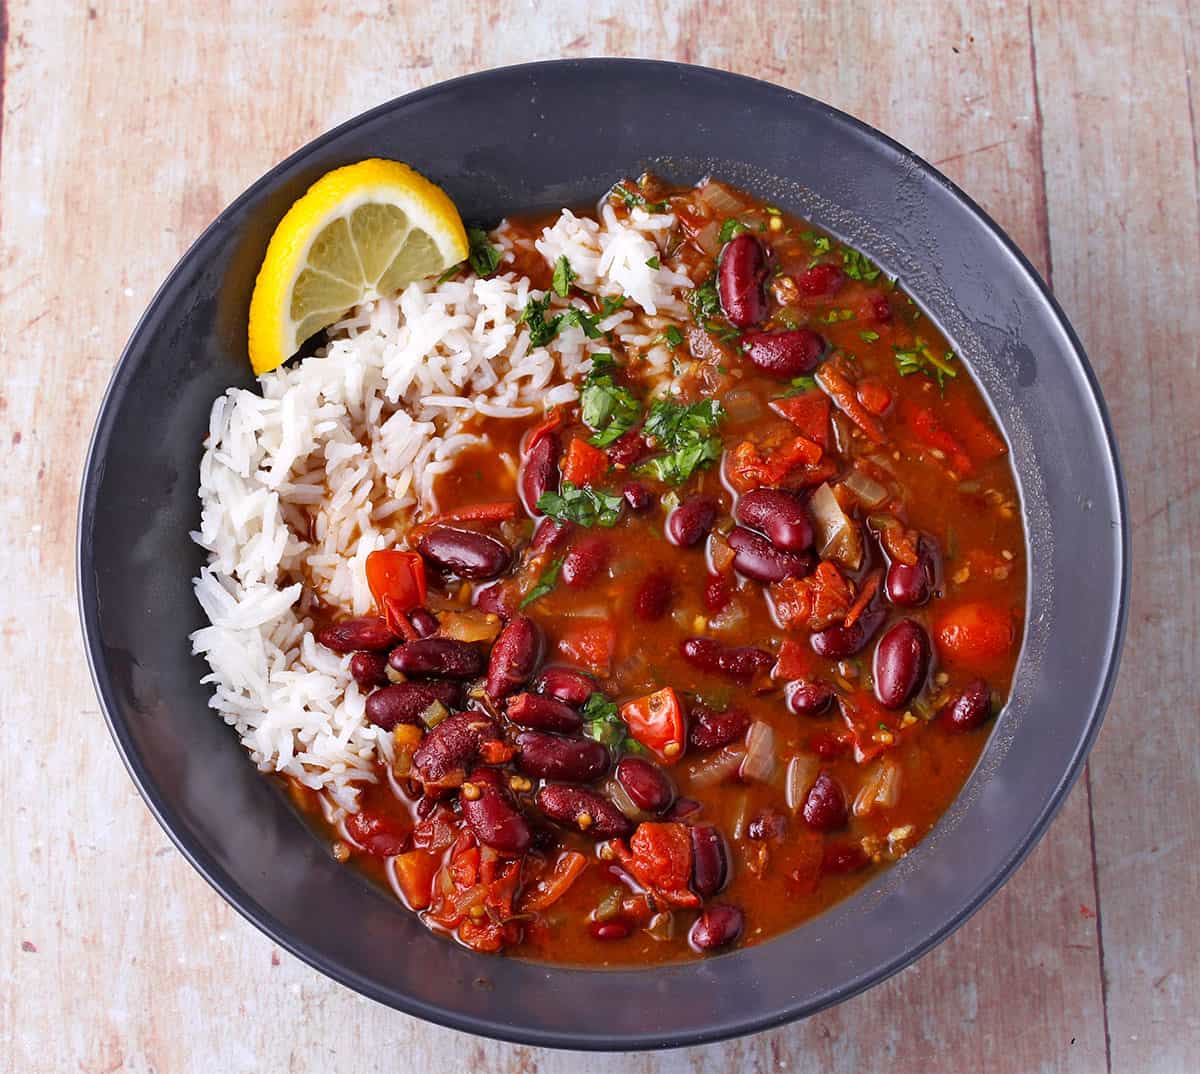 A black bowl of kidney bean curry with white rice and a lemon slice.